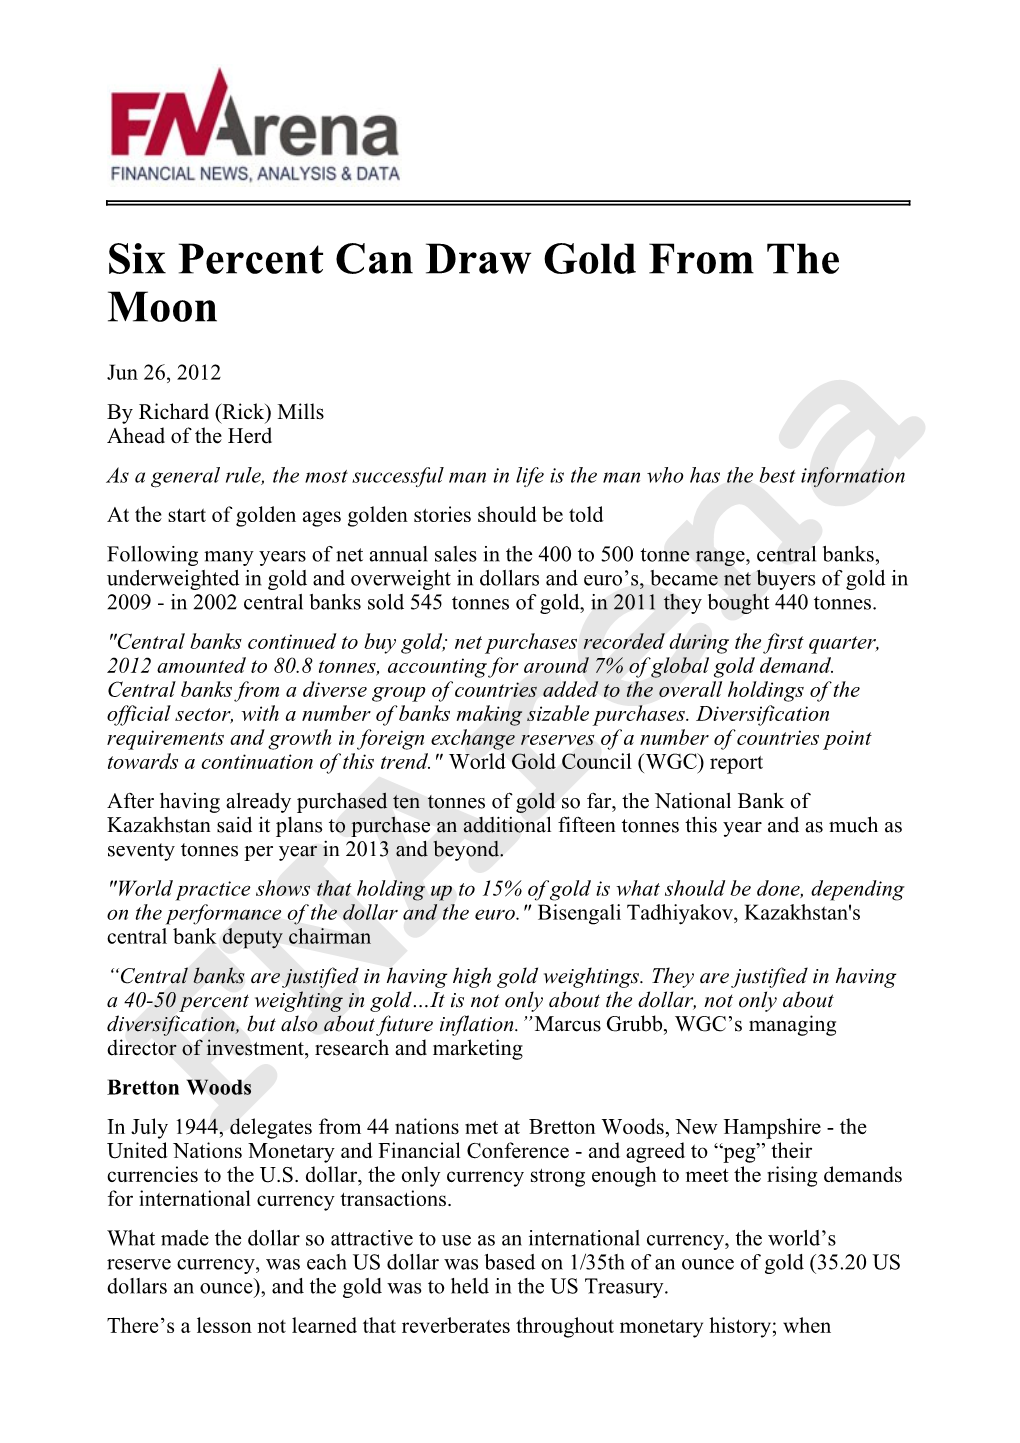 Six Percent Can Draw Gold from the Moon